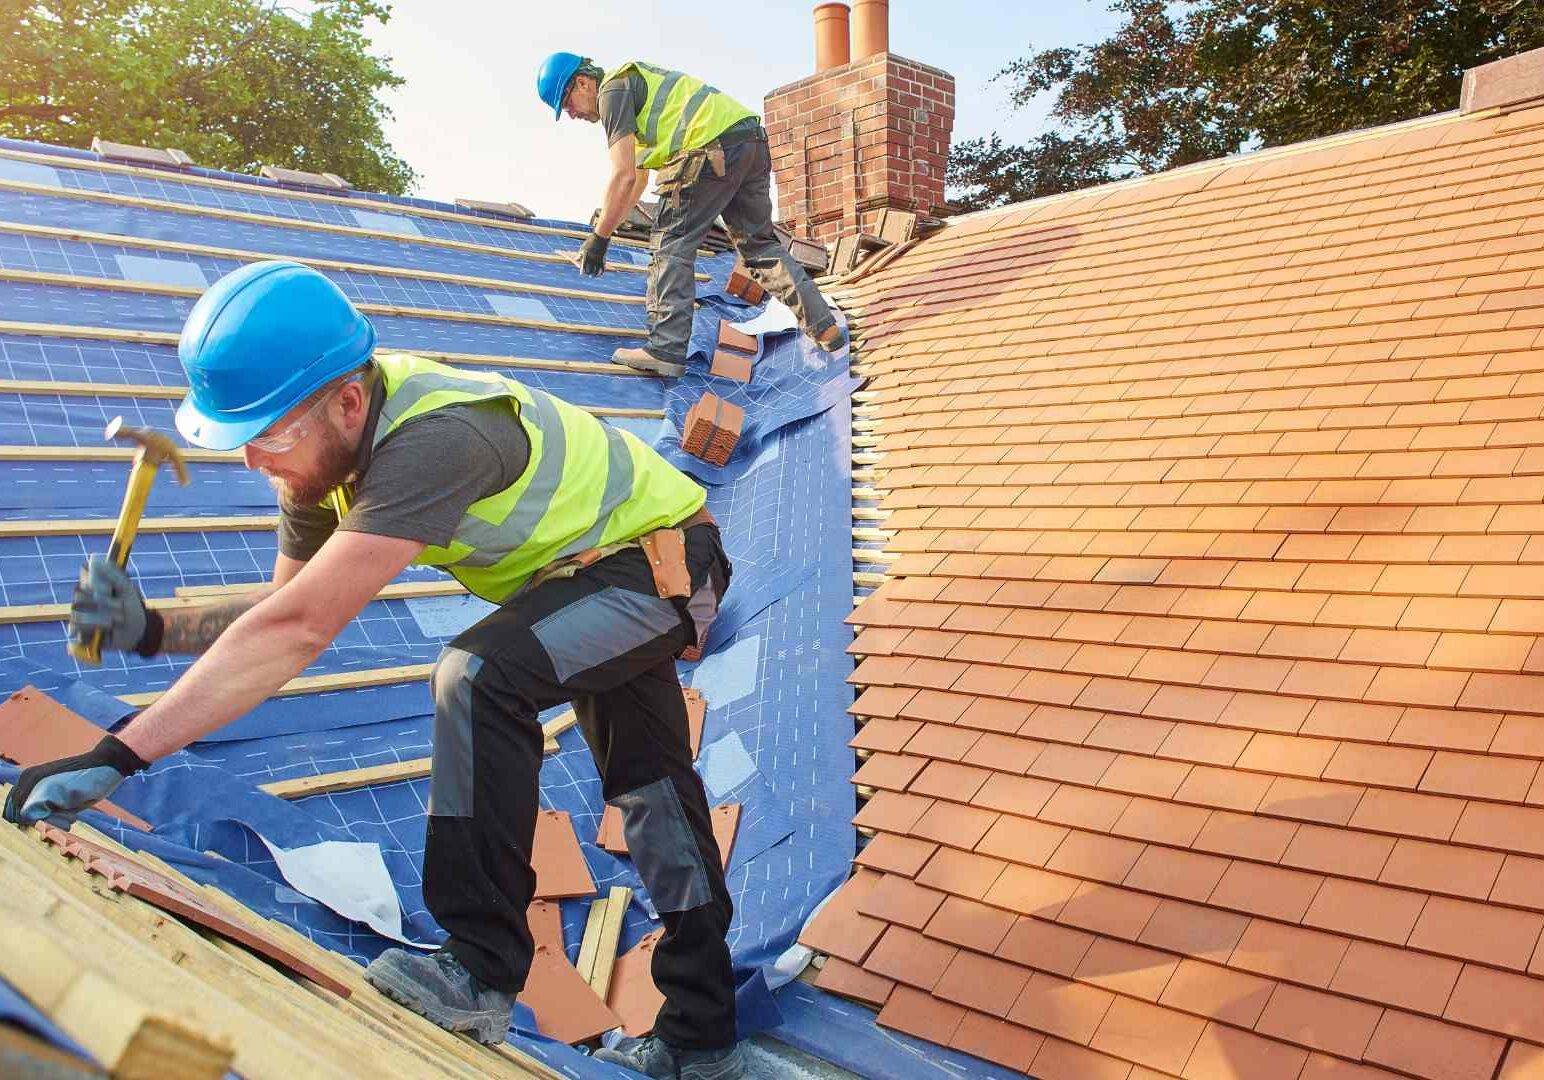 Two men working on a roof with blue shingles.